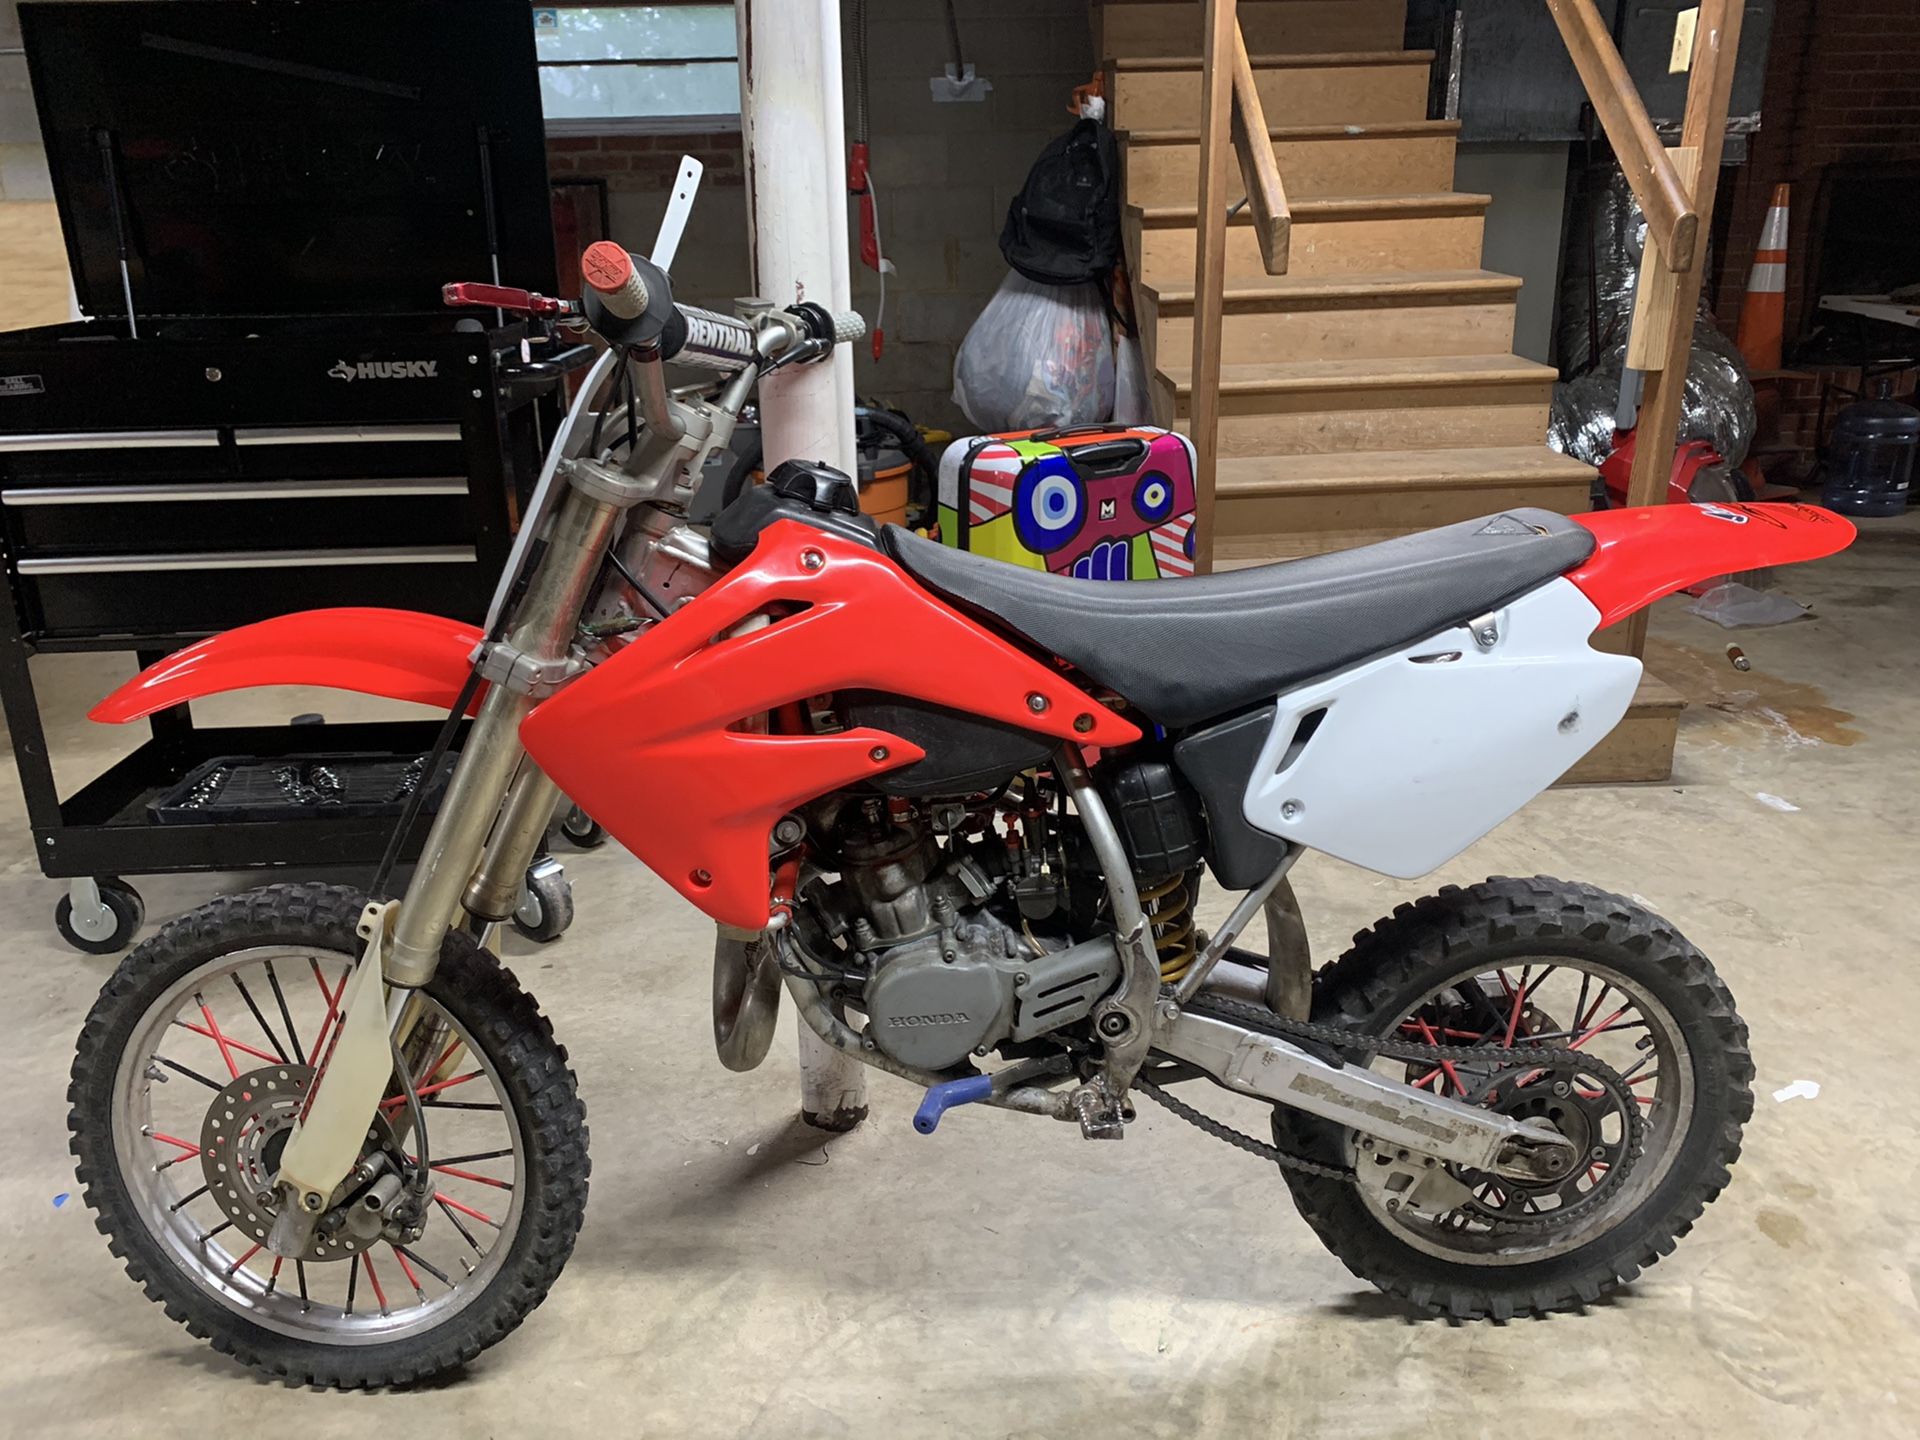 2007cr85r expert. OPEN TO TRADES FOR TRUCK